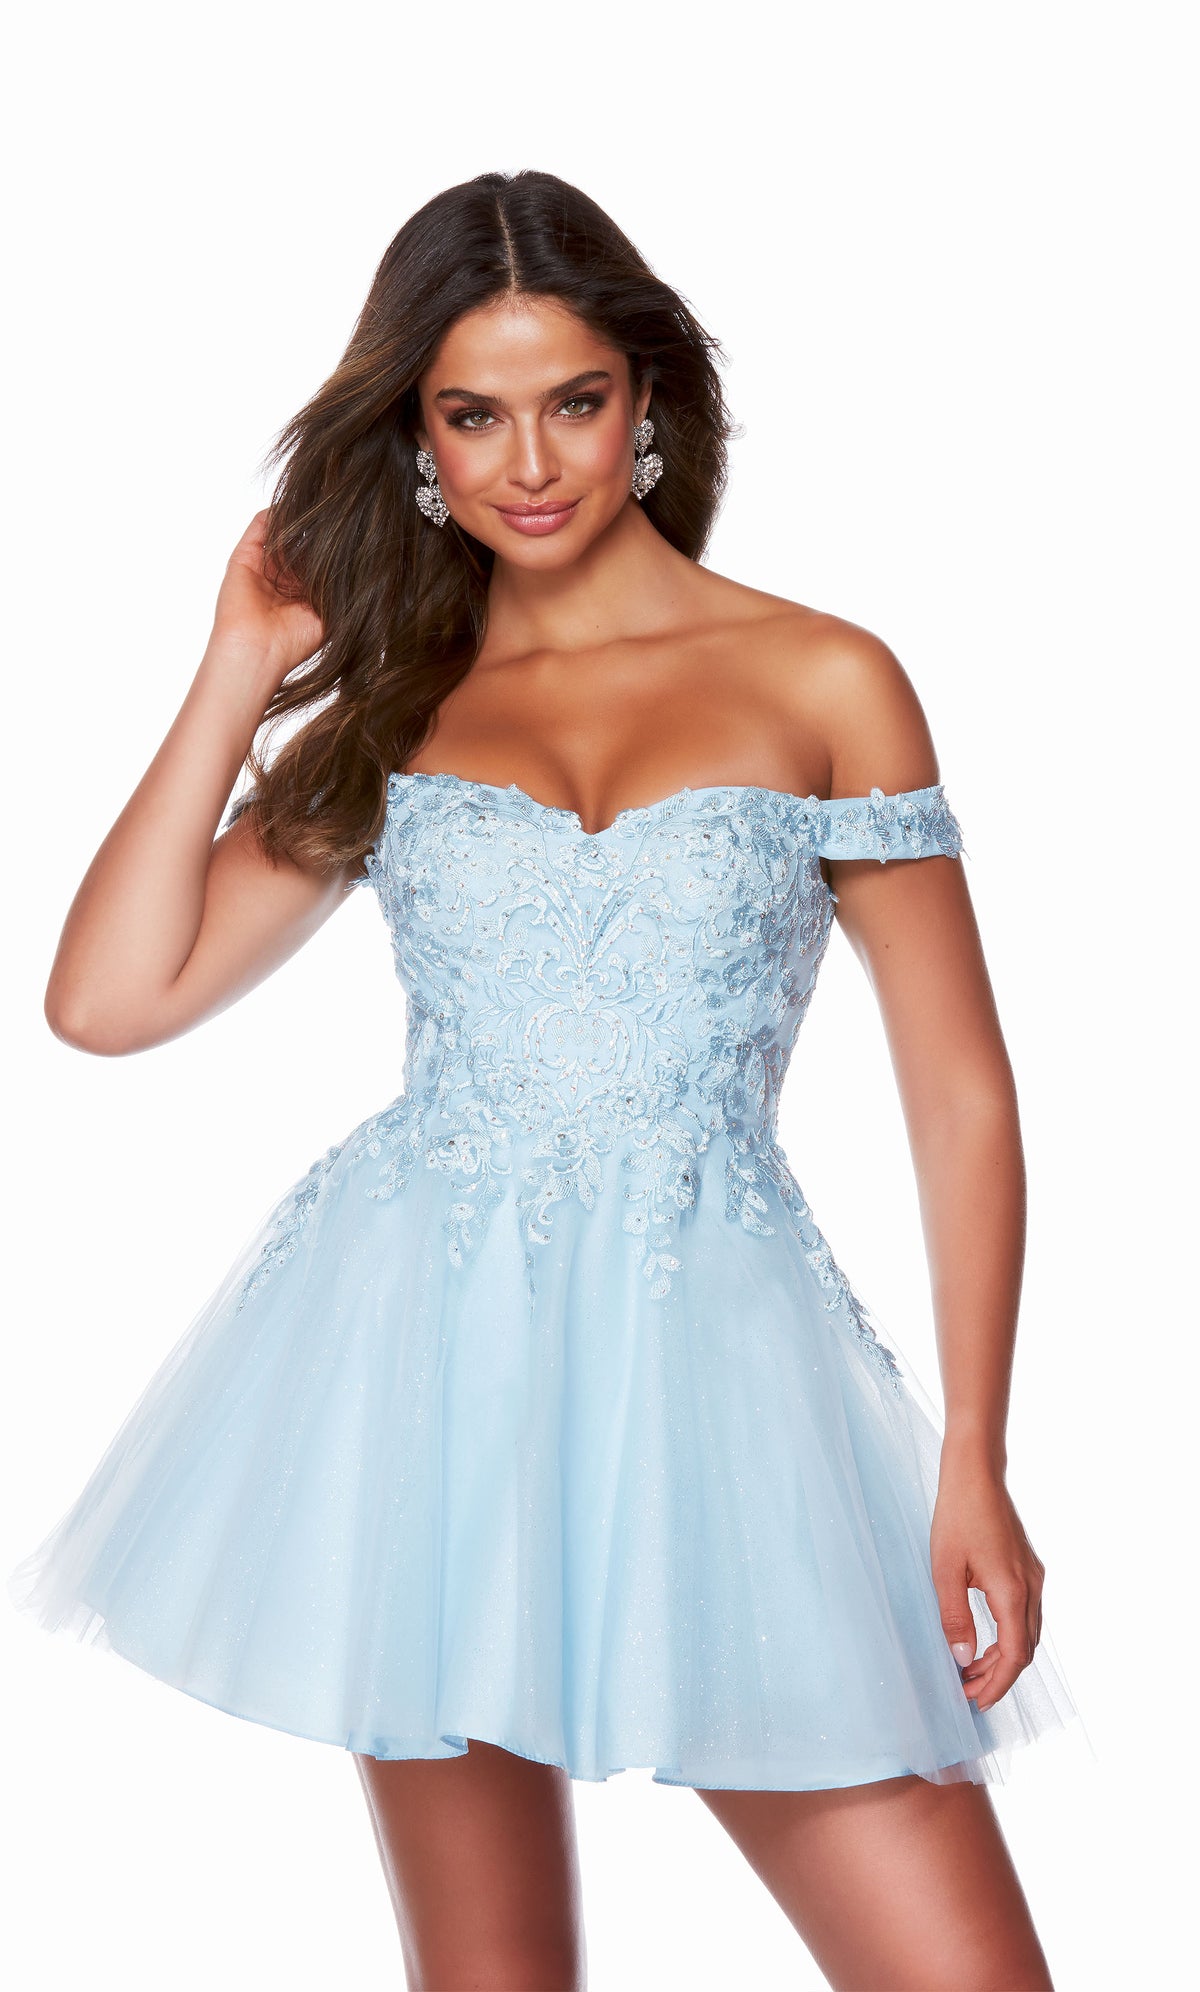 A light blue, off the shoulder homecoming dress adorned with delicate lace overlay and featuring a full tulle skirt.